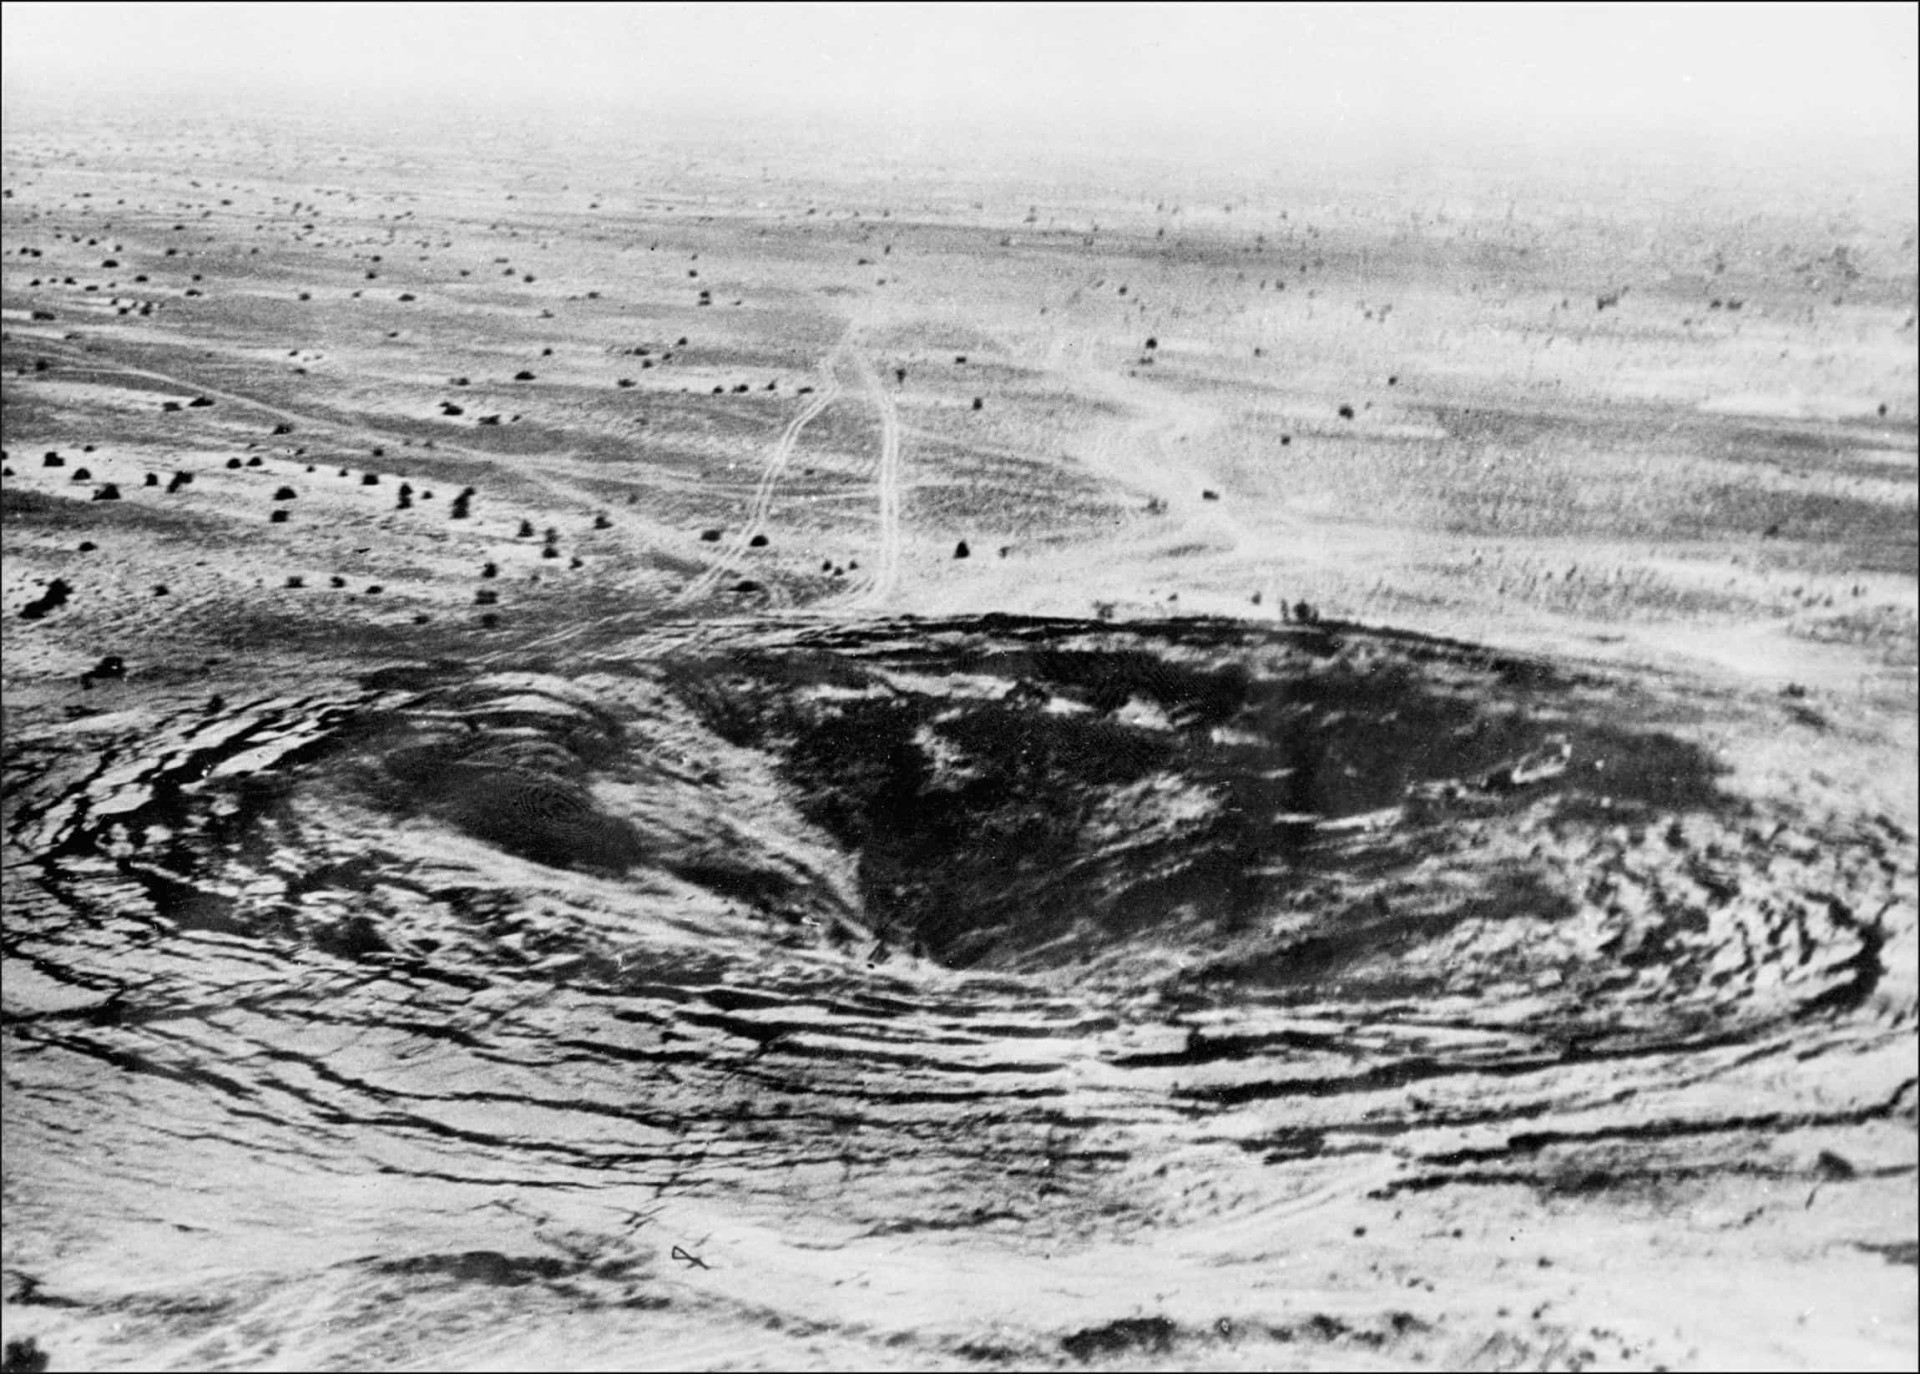 <p>India's testing of a nuclear device and the stalling of the vital SALT II talks edges the clock forward. Pictured: a crater marks the site of the first Indian underground nuclear test conducted on May 18, 1974 at Pokhran in the desert state of Rajasthan.</p><p>You may also like:<a href="https://www.starsinsider.com/n/368021?utm_source=msn.com&utm_medium=display&utm_campaign=referral_description&utm_content=490923v3en-us"> Underexplored places you should definitely visit</a></p>